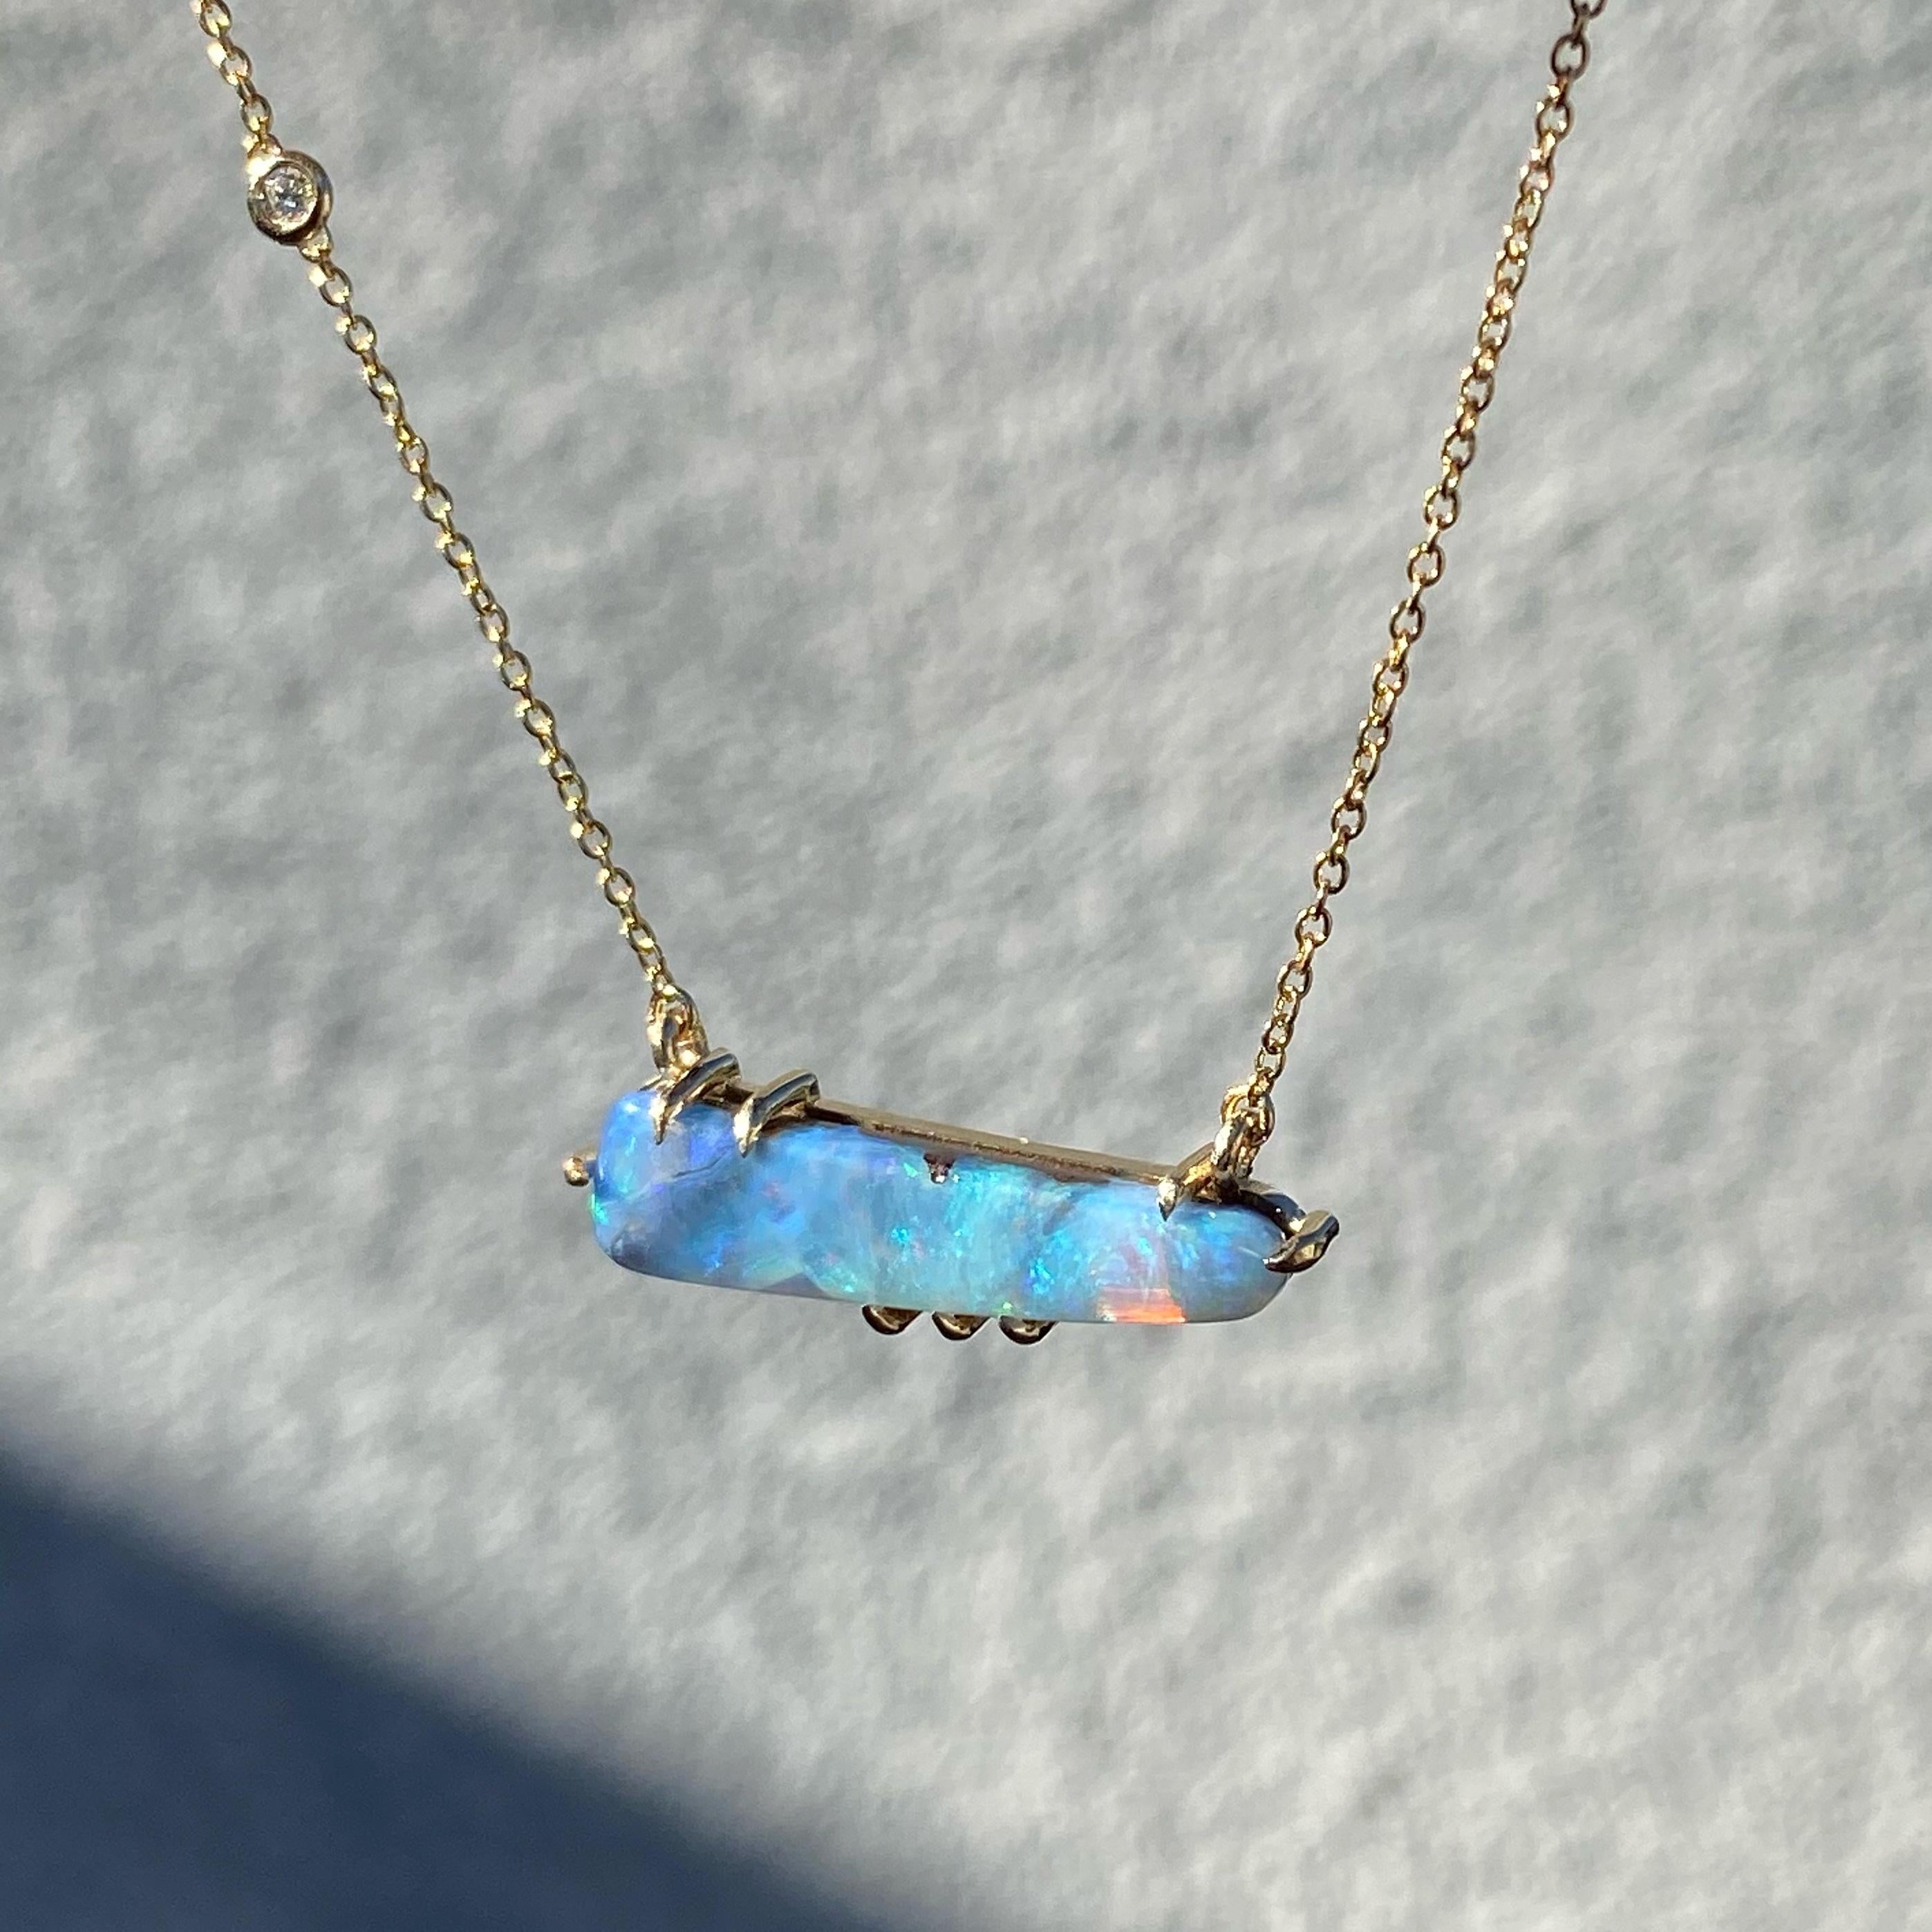 Winter Flurry Boulder Opal Diamond Station Necklace in 14k Gold by NIXIN Jewelry For Sale 2